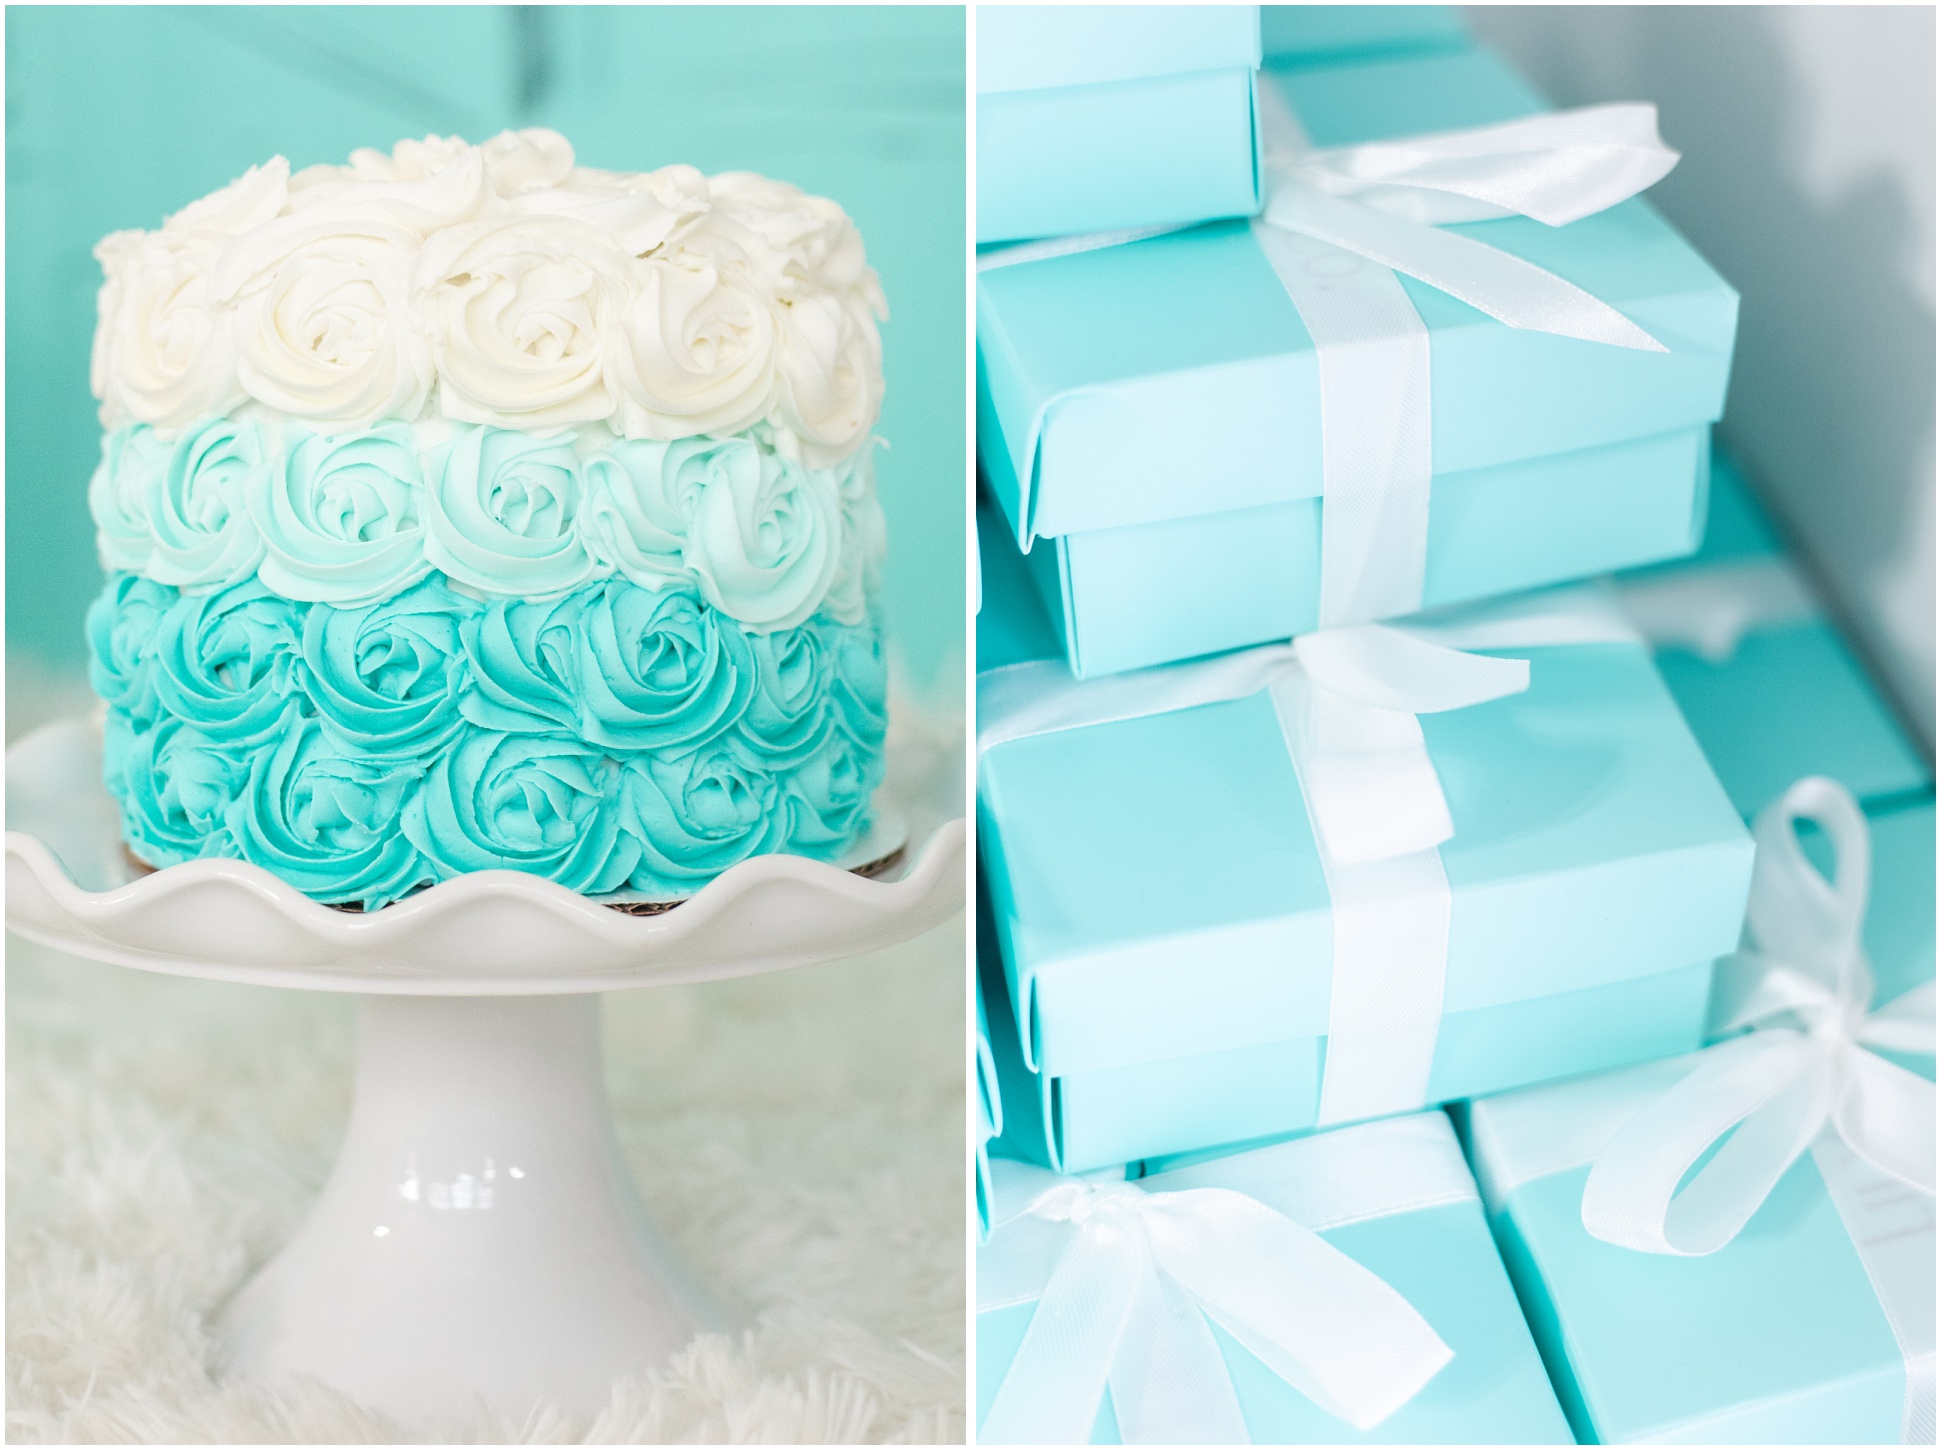 Cake with ombre blue and white roses; top view of Tiffany blue boxes with white ribbon tied in a bow